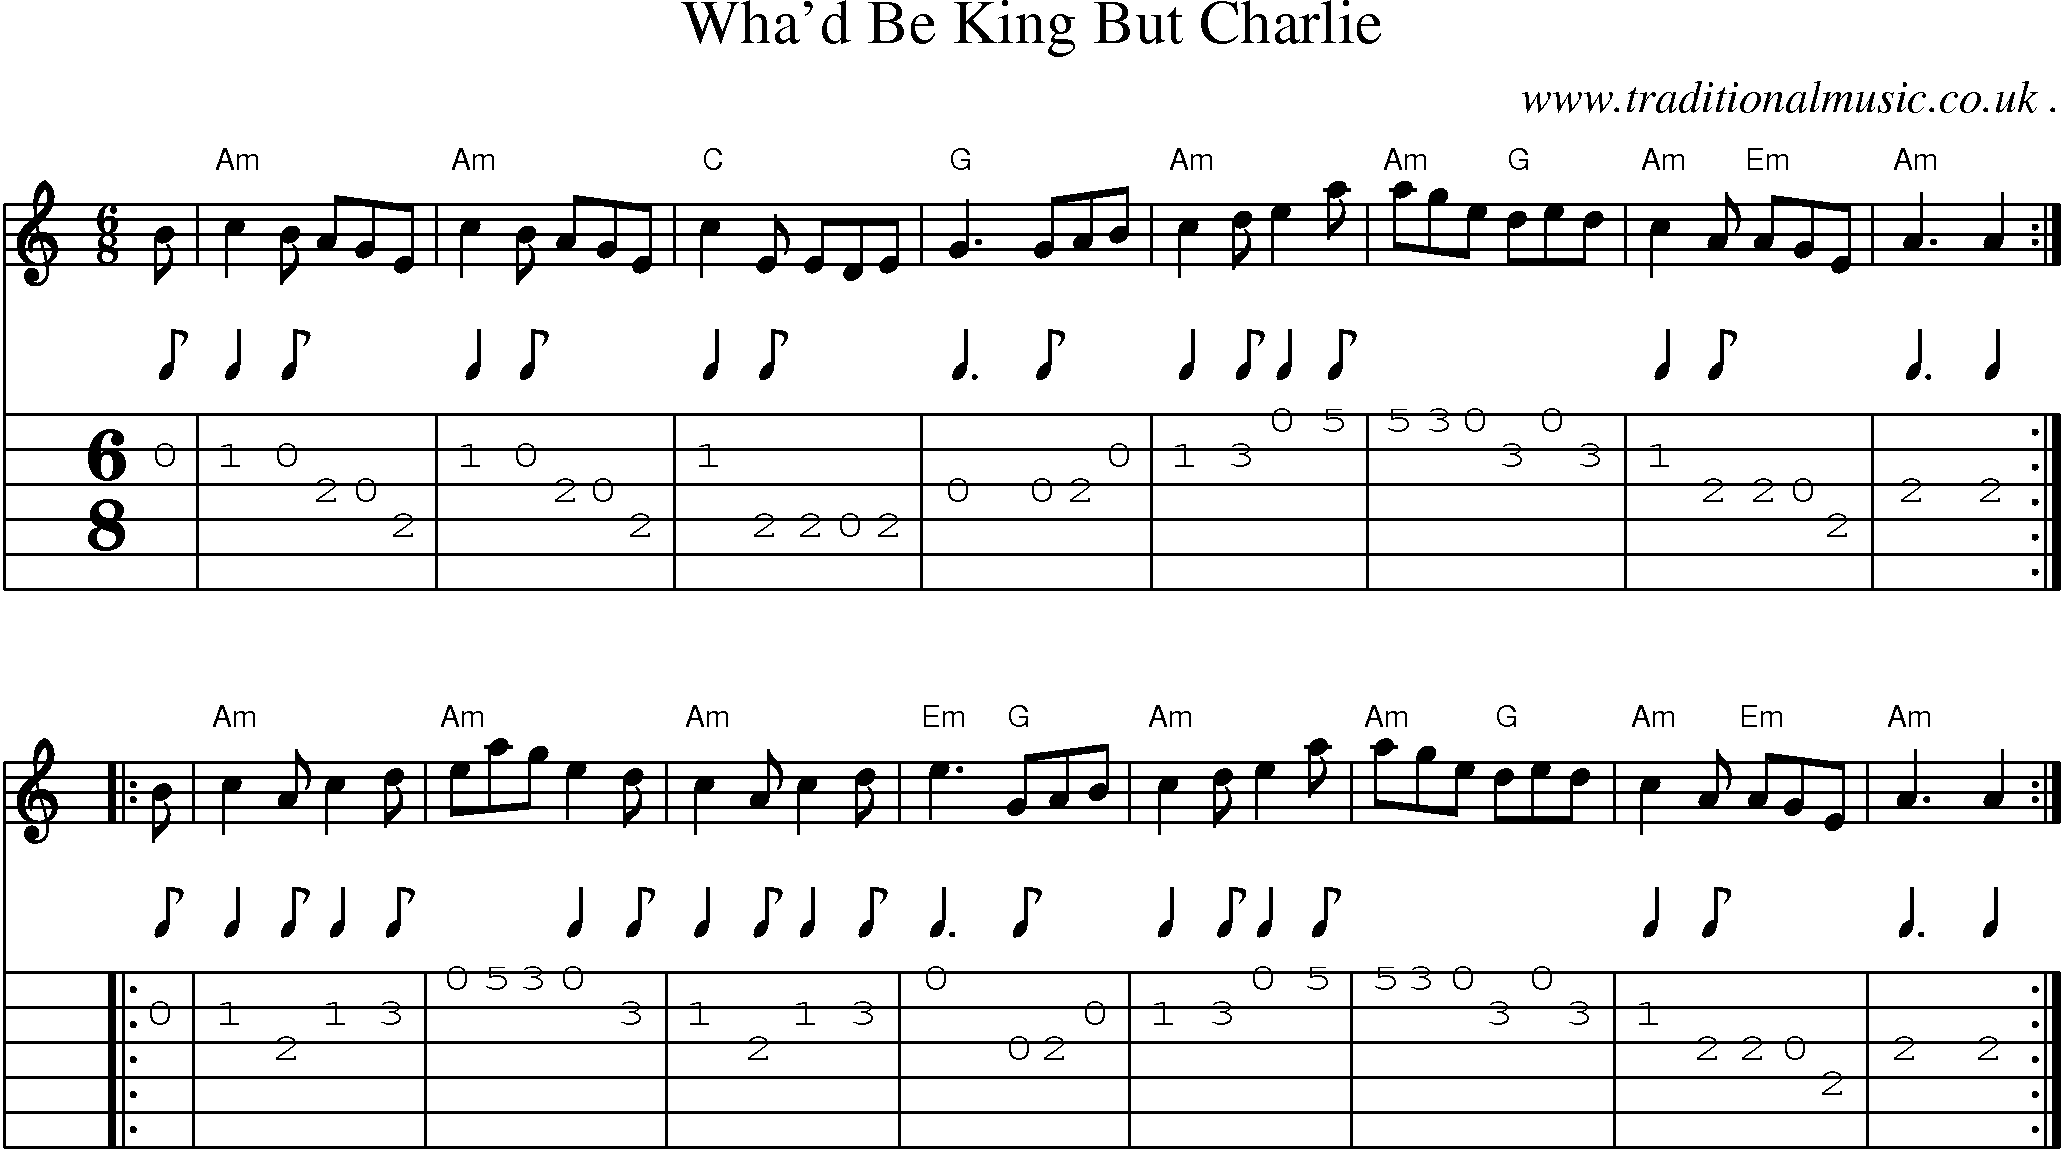 Sheet-music  score, Chords and Guitar Tabs for Whad Be King But Charlie